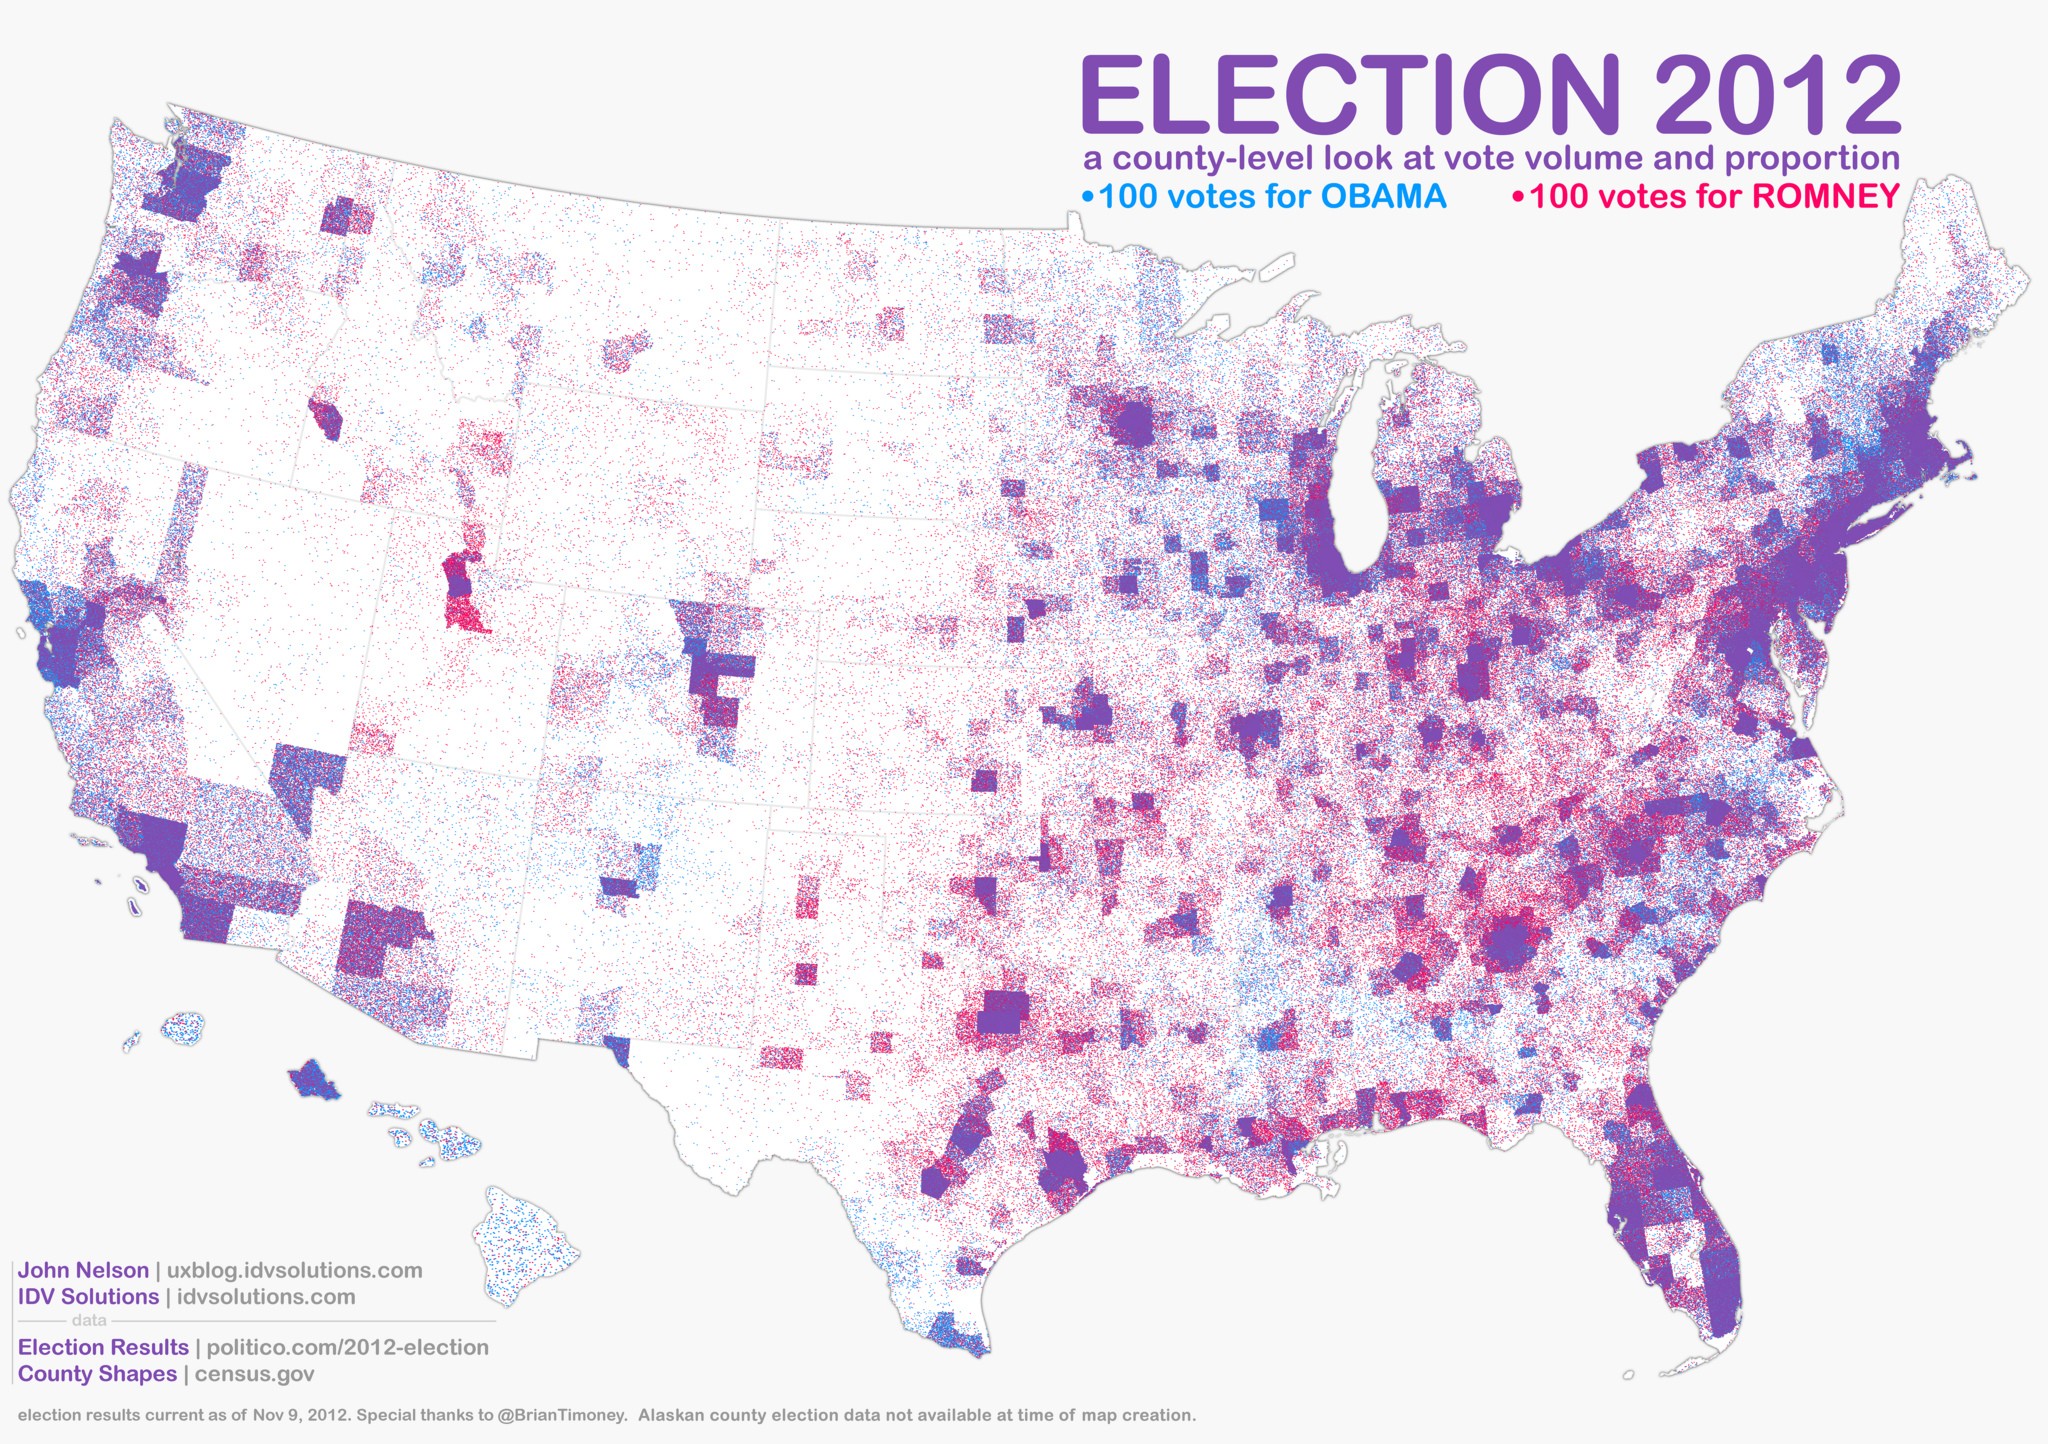 “A county level look at vote volume and proportion.” Source: IDVSolutions